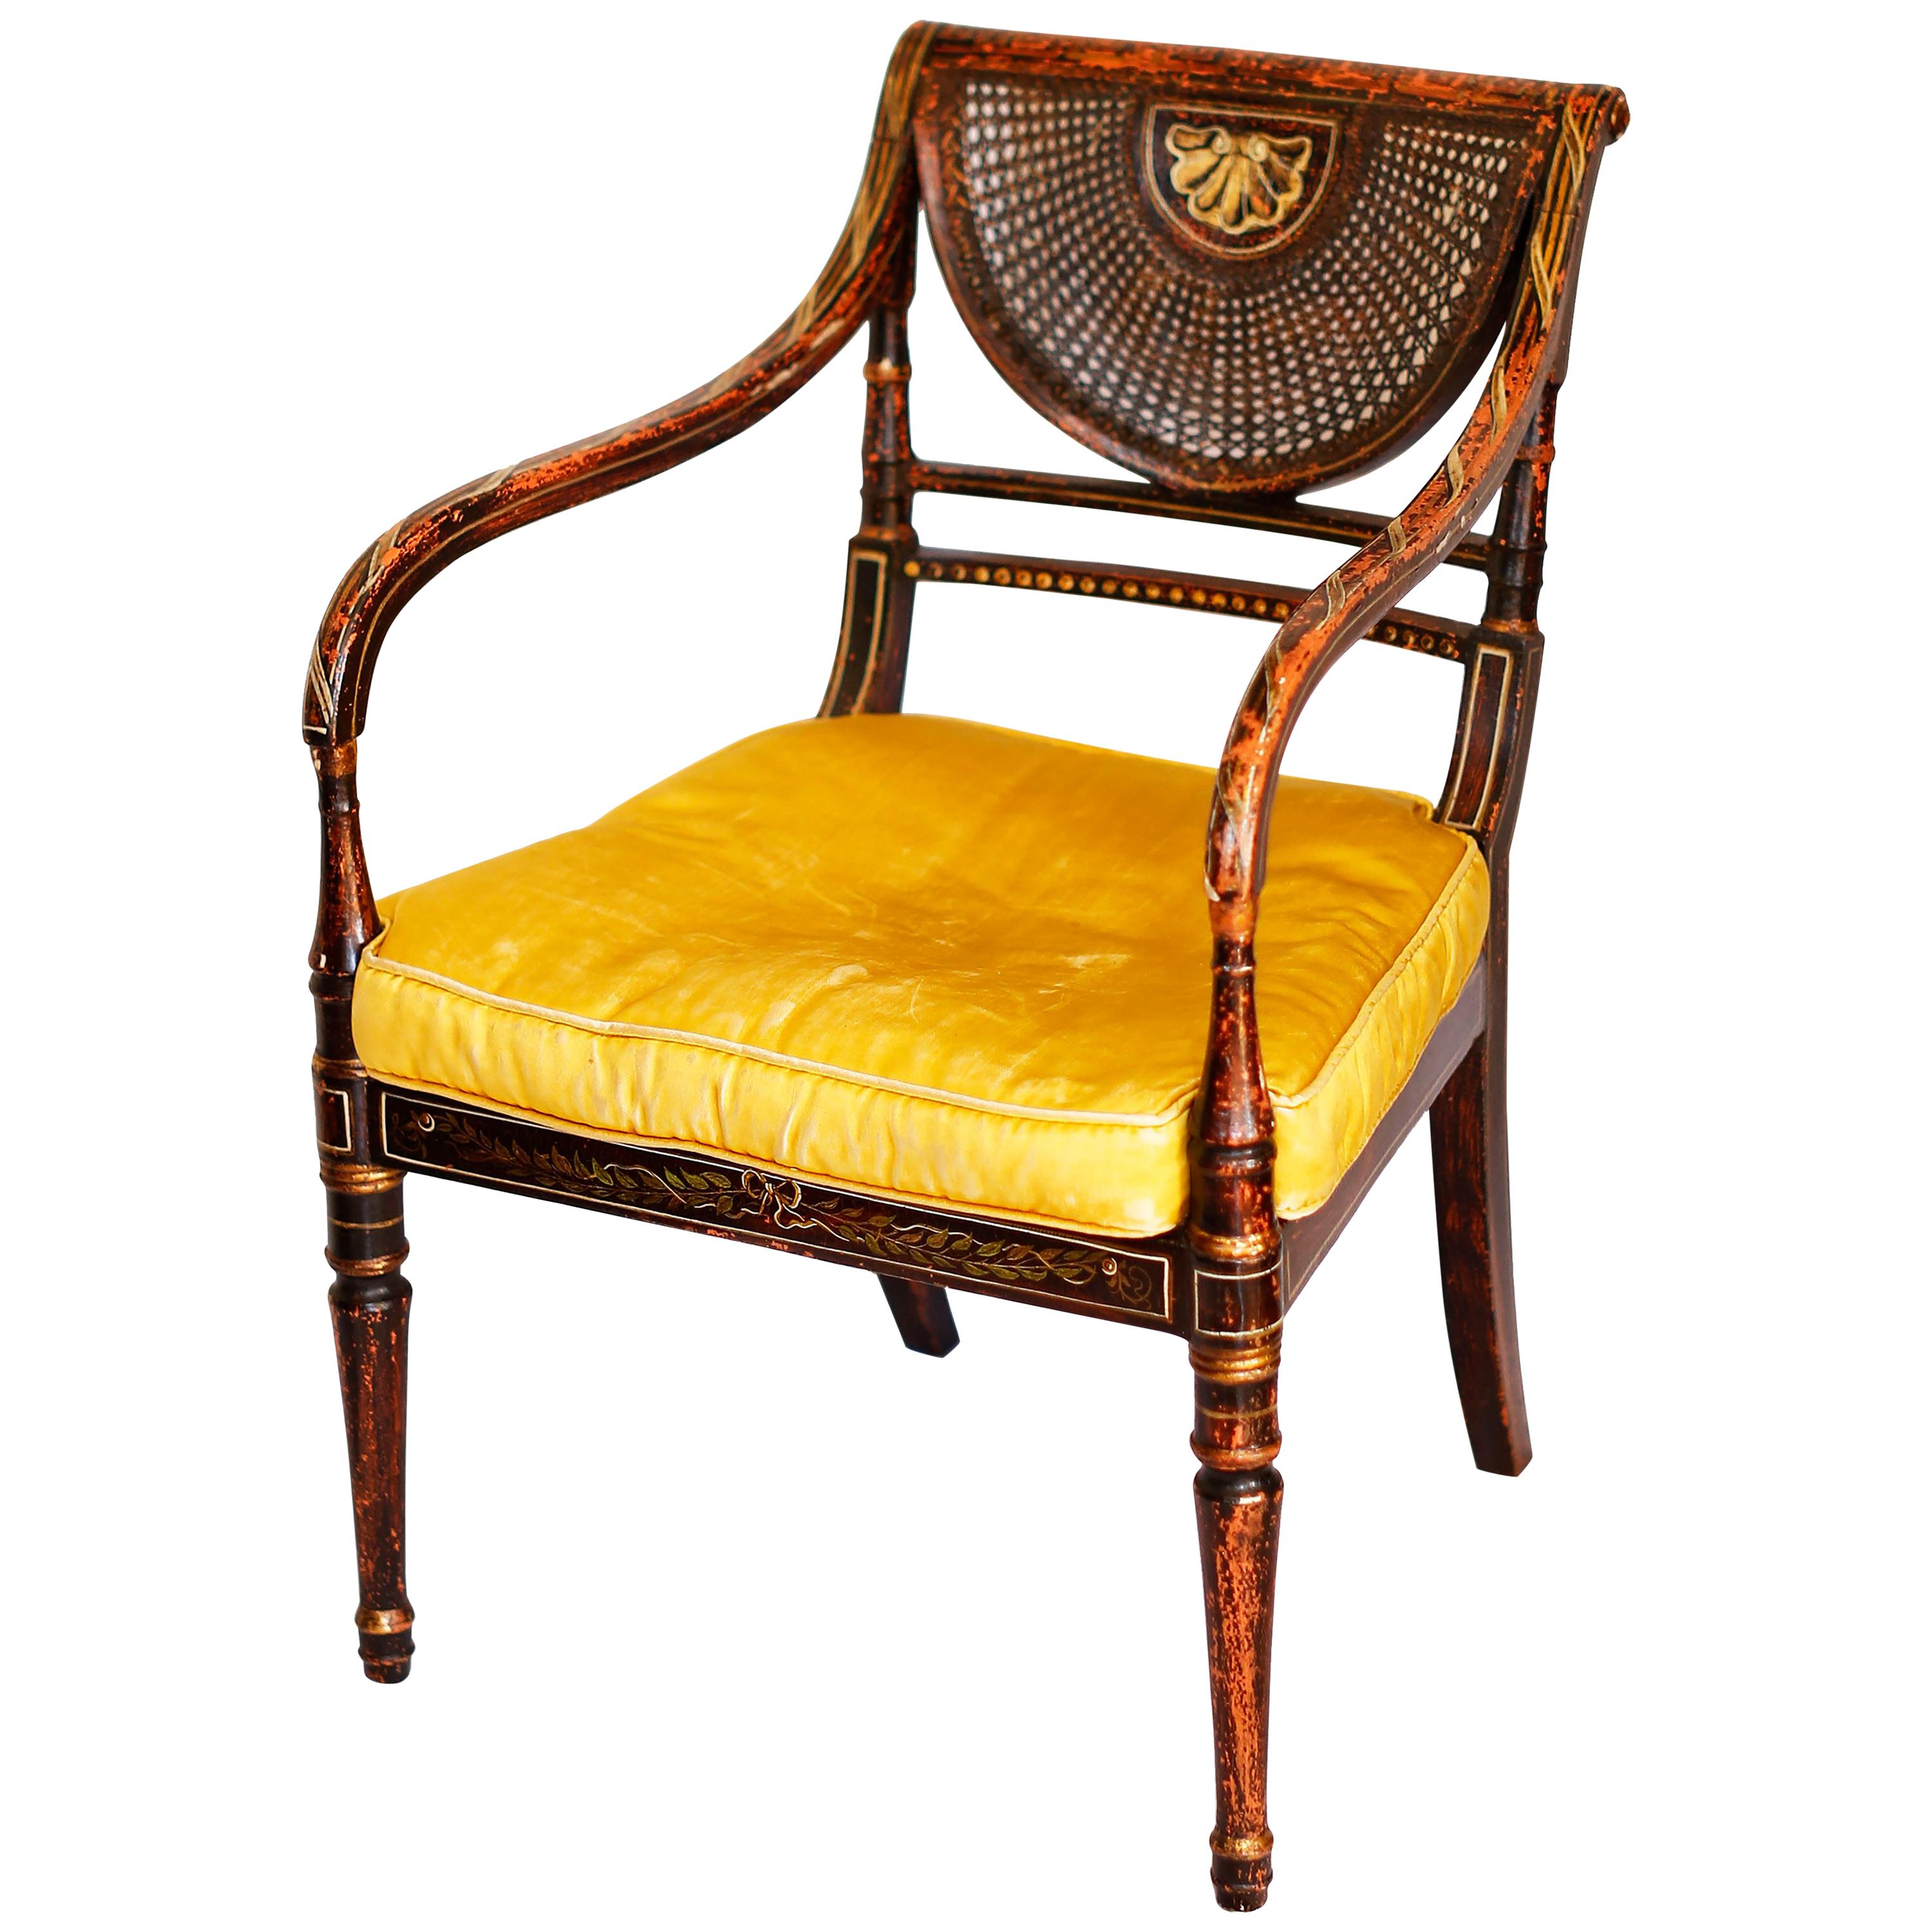 Early 19th Century Parcel-Gilt Caned Armchair, after Angelica Kauffman